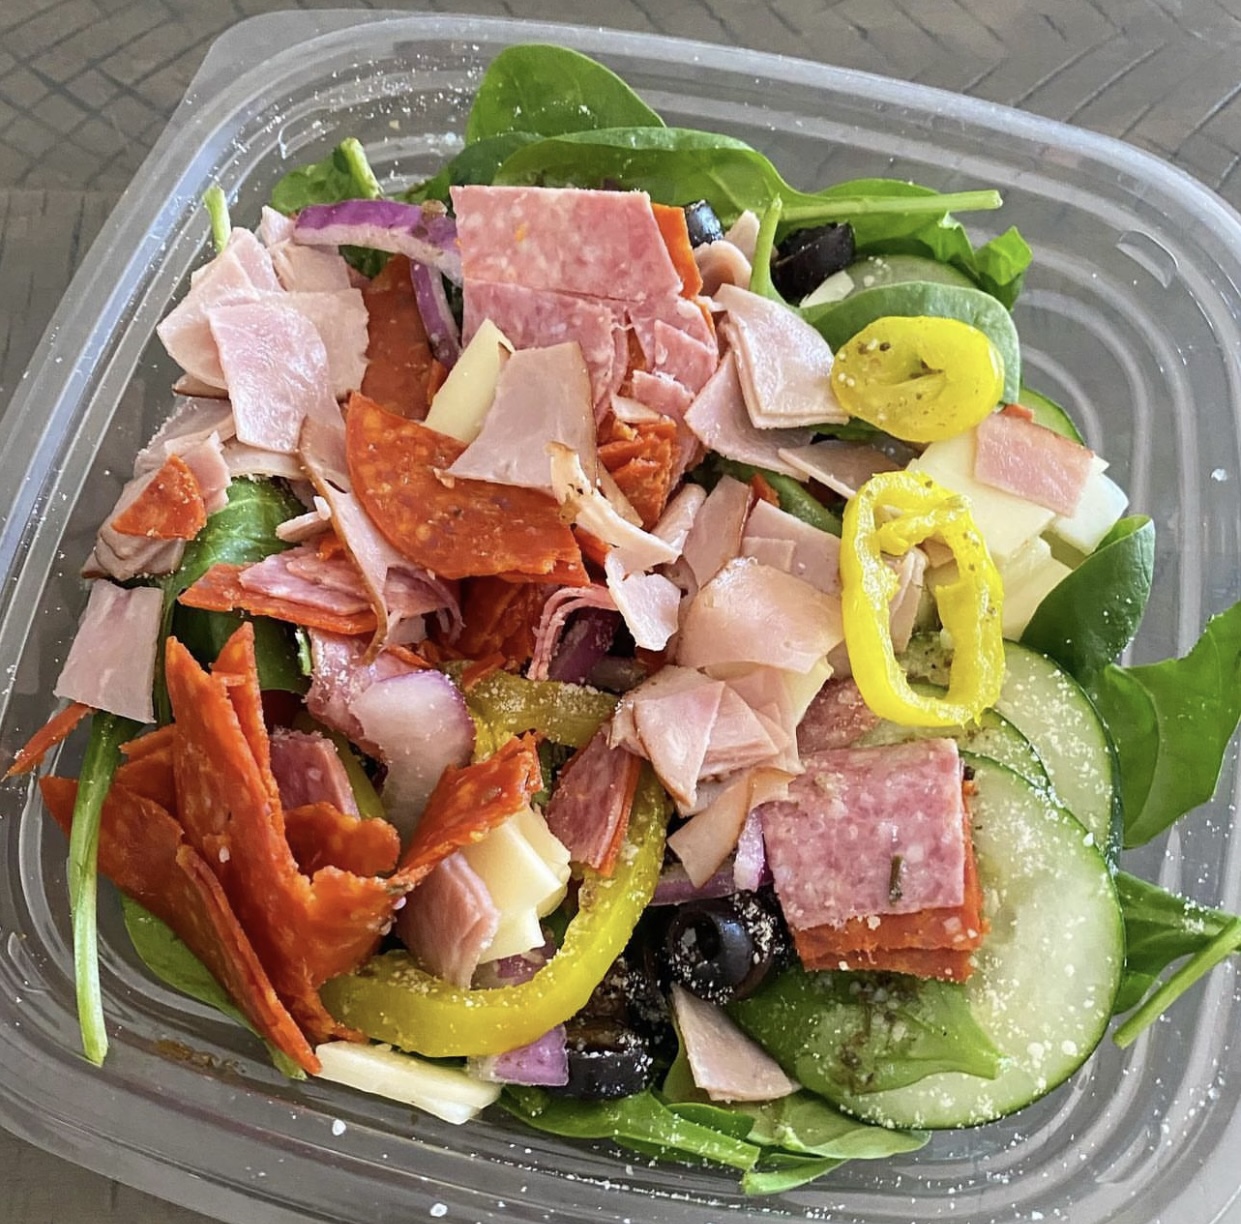 Subway Protein bowl with meats, lettuce and cheese.